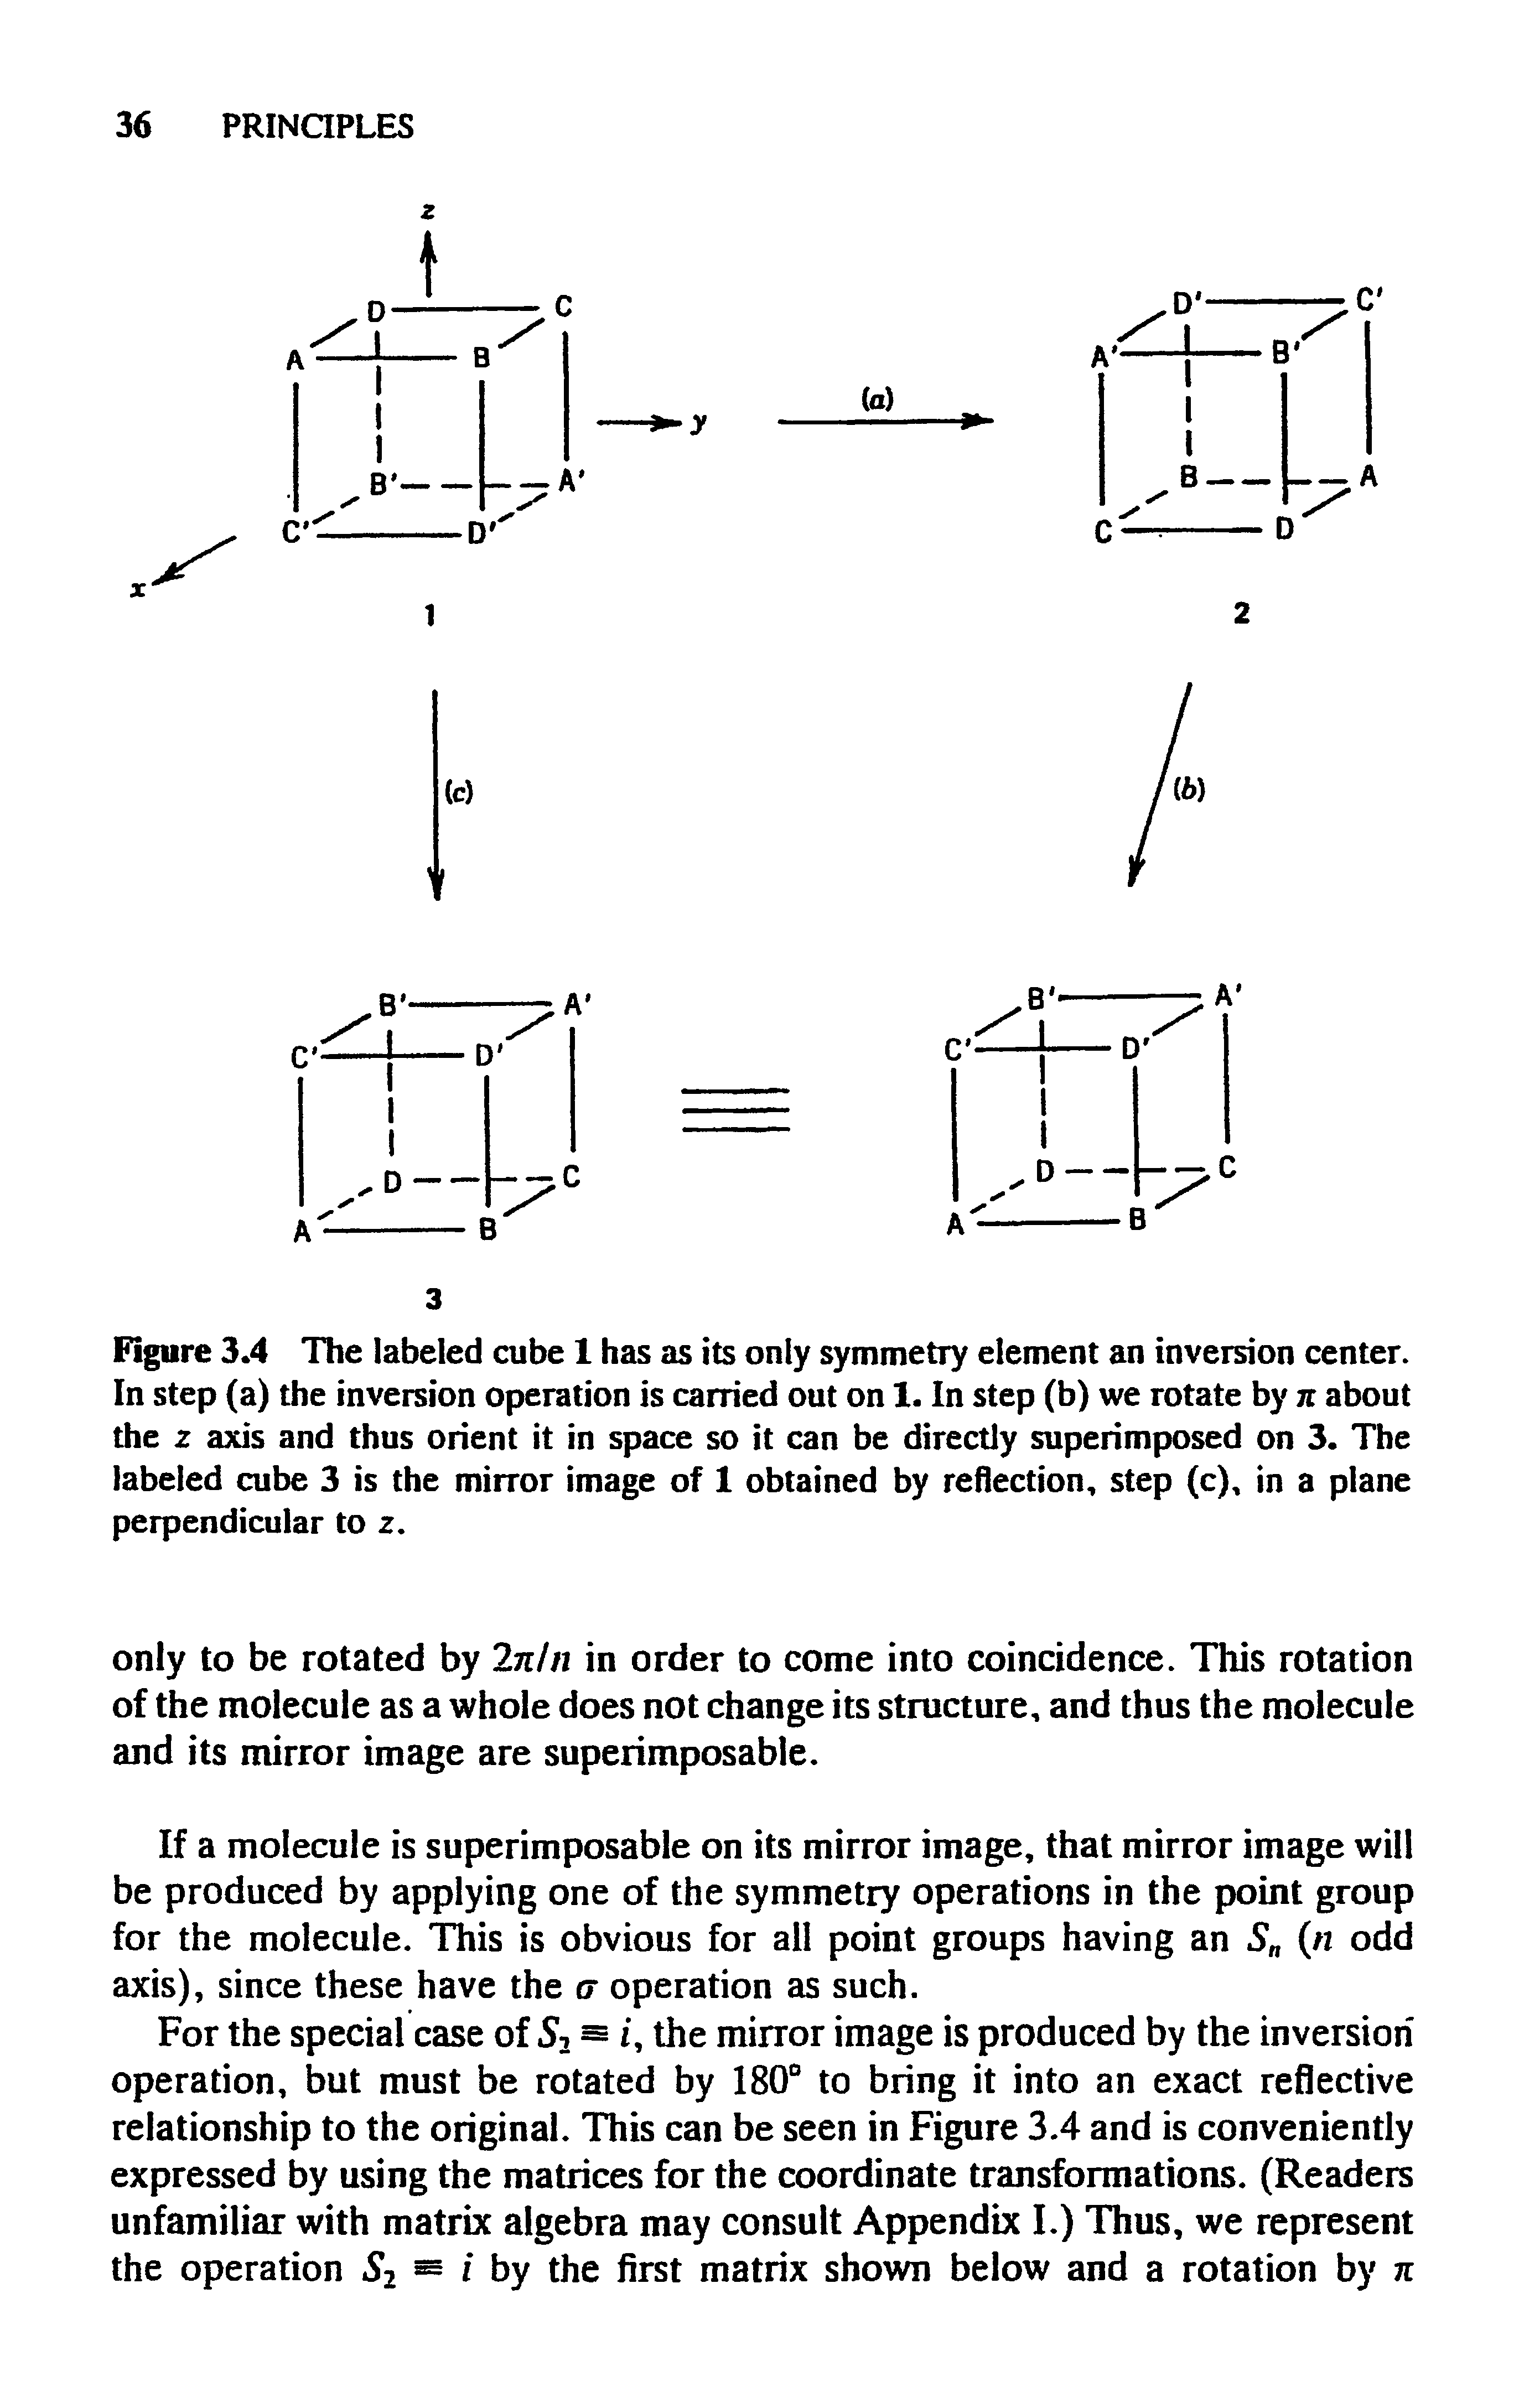 Figure 3.4 The labeled cube 1 has as its only symmetry element an inversion center. In step (a) the inversion operation is carried out on 1. In step (b) we rotate by n about the 2 axis and thus orient it in space so it can be directly superimposed on 3. The labeled cube 3 is the mirror image of 1 obtained by reflection, step (c), in a plane perpendicular to z.